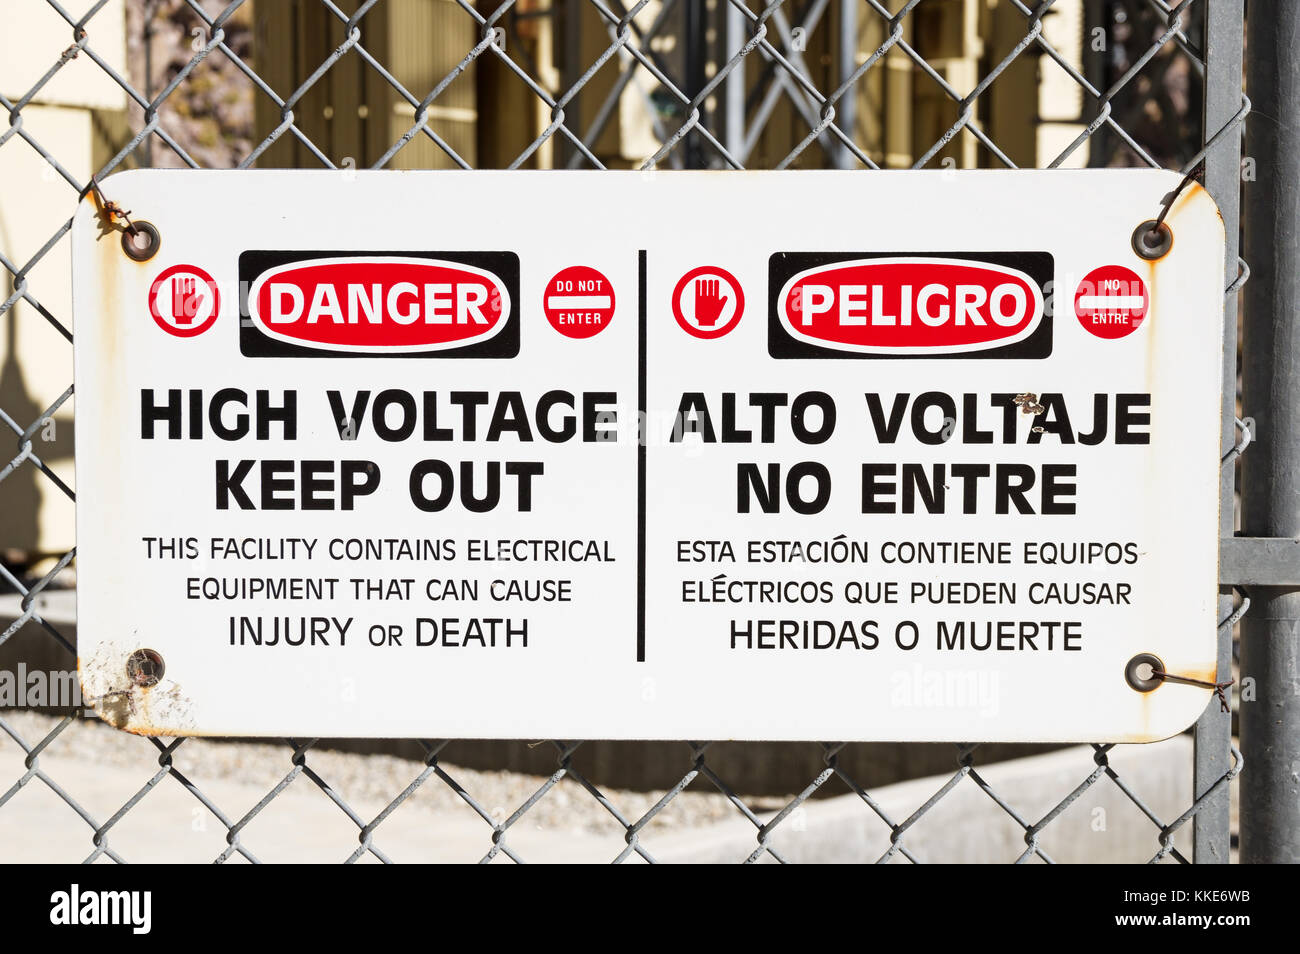 danger high voltage keep out sign on a chain link fence around electrical equipment Stock Photo